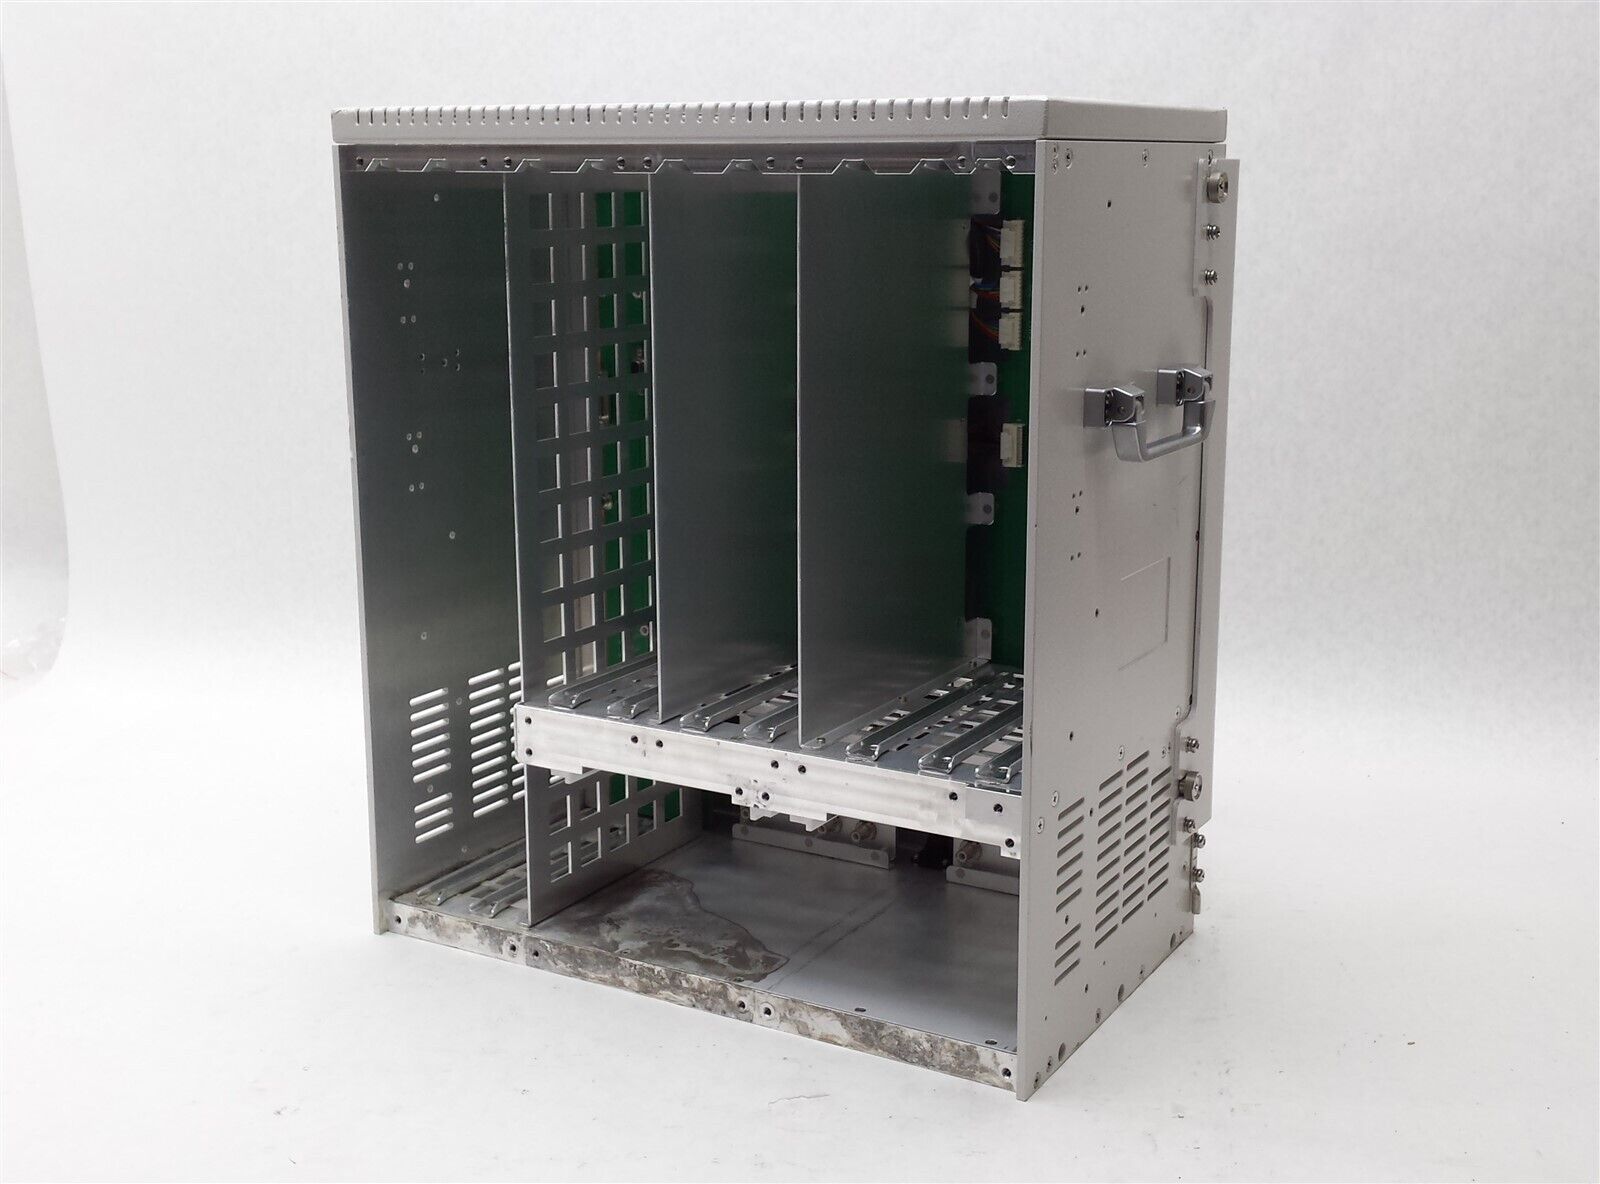 SYM VISION 24/30 BI-DIRECTIONAL AMPLIFIER REPEATER 7-SLOT MAINFRAME CHASSIS